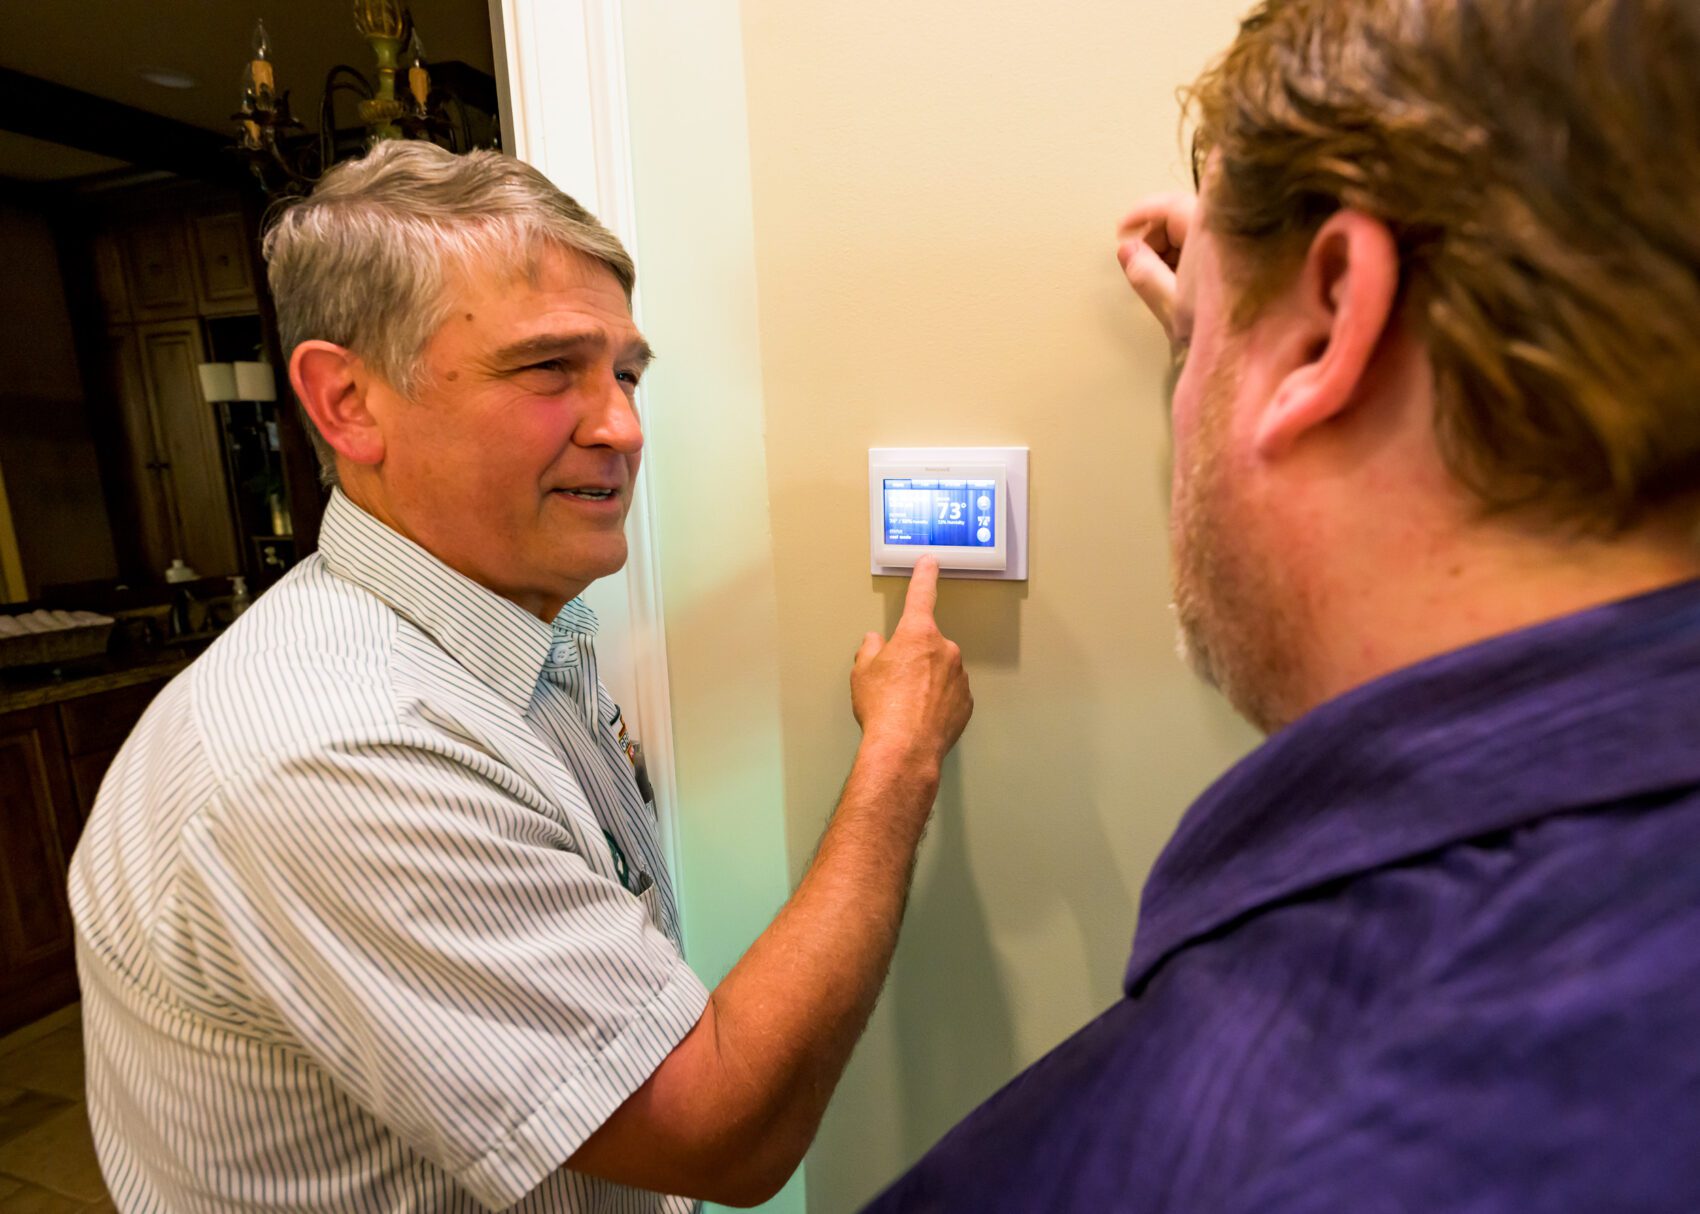 AC tech checking thermostat